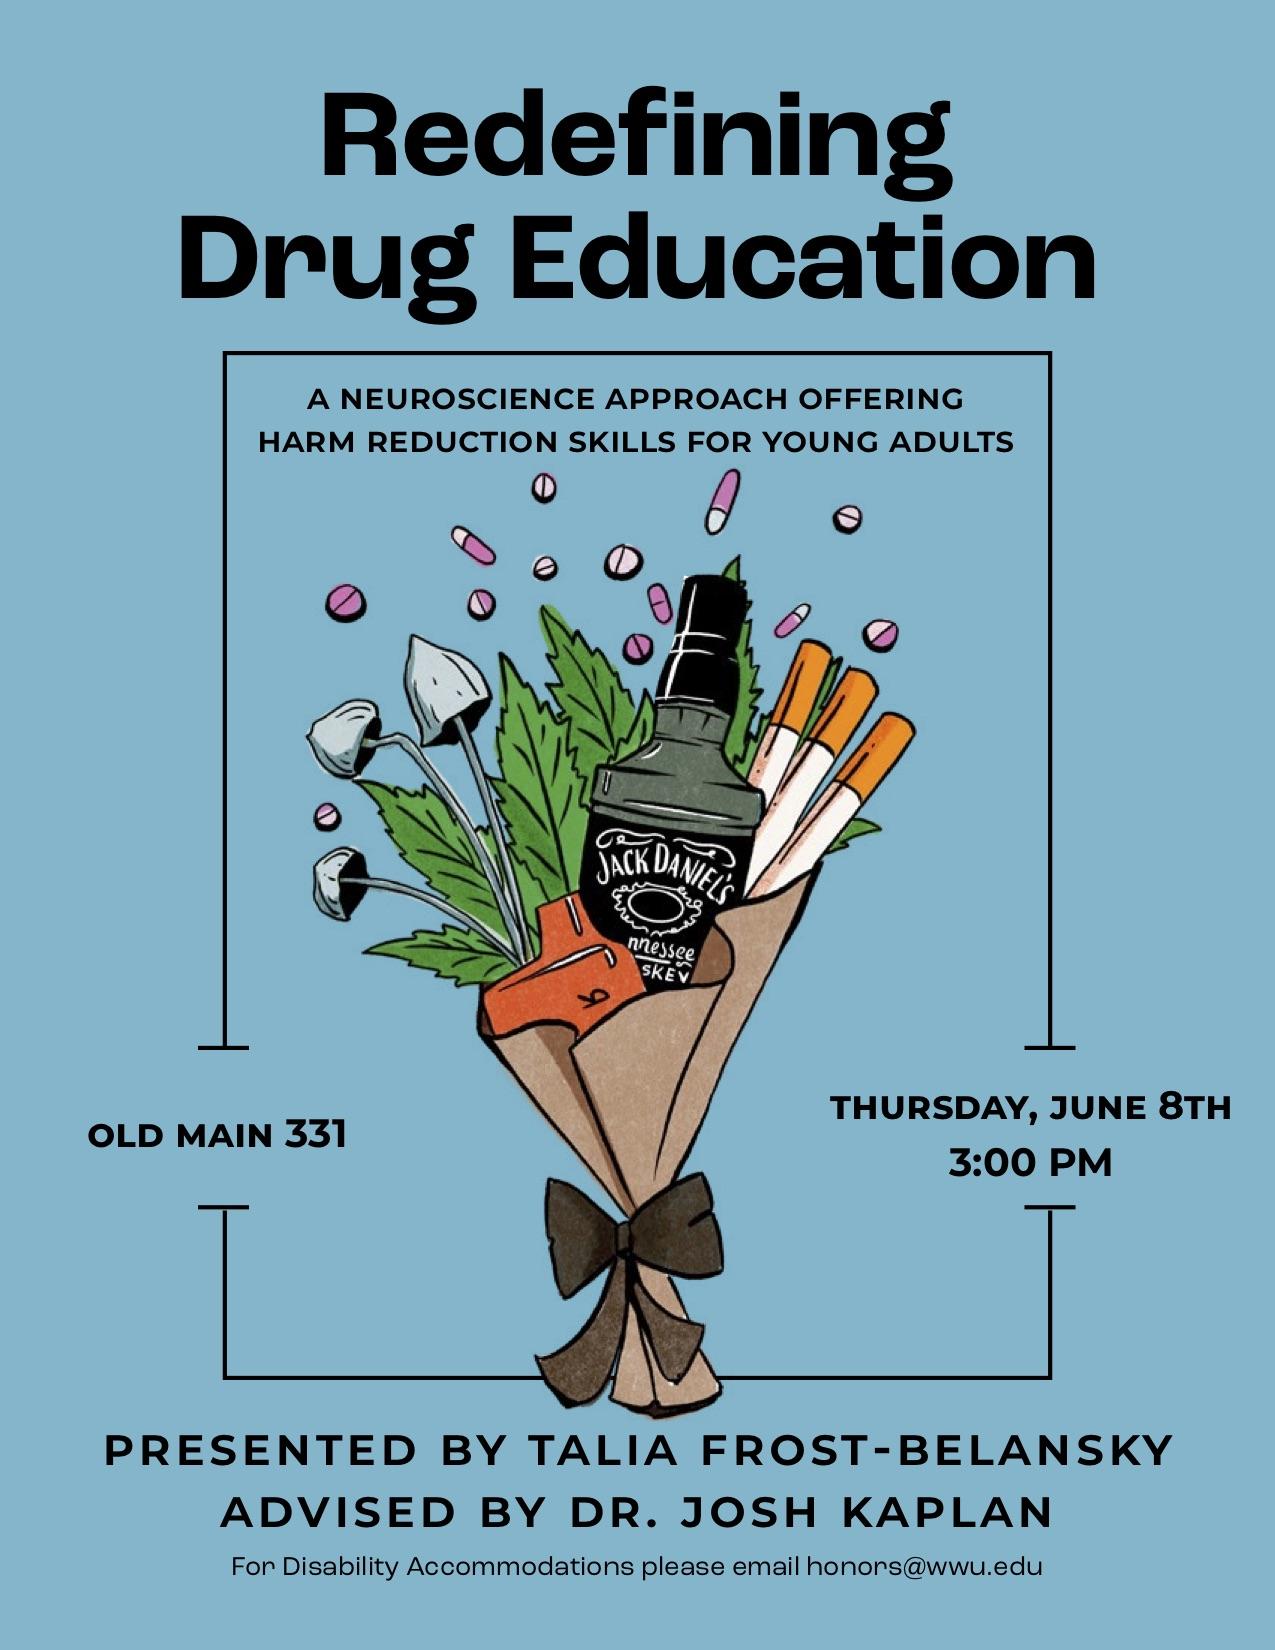 A poster with a turquoise background with an image of a bouquet holding various drug paraphernalia including: Jack Daniel's Whiskey, cigarettes, a nicotine vape, mushrooms, a marijuana leaf, and pills flying out of the top. Text reads, "Redefining drug education; A neuroscience approach offering harm reduction skills to young adults; Old Main 331 Thursday June 8th 3:00 PM; Presented by Talia Frost-Belansky Advised by Dr. Josh Kaplan,  For disability accommodations, please email honors@wwu.edu." 